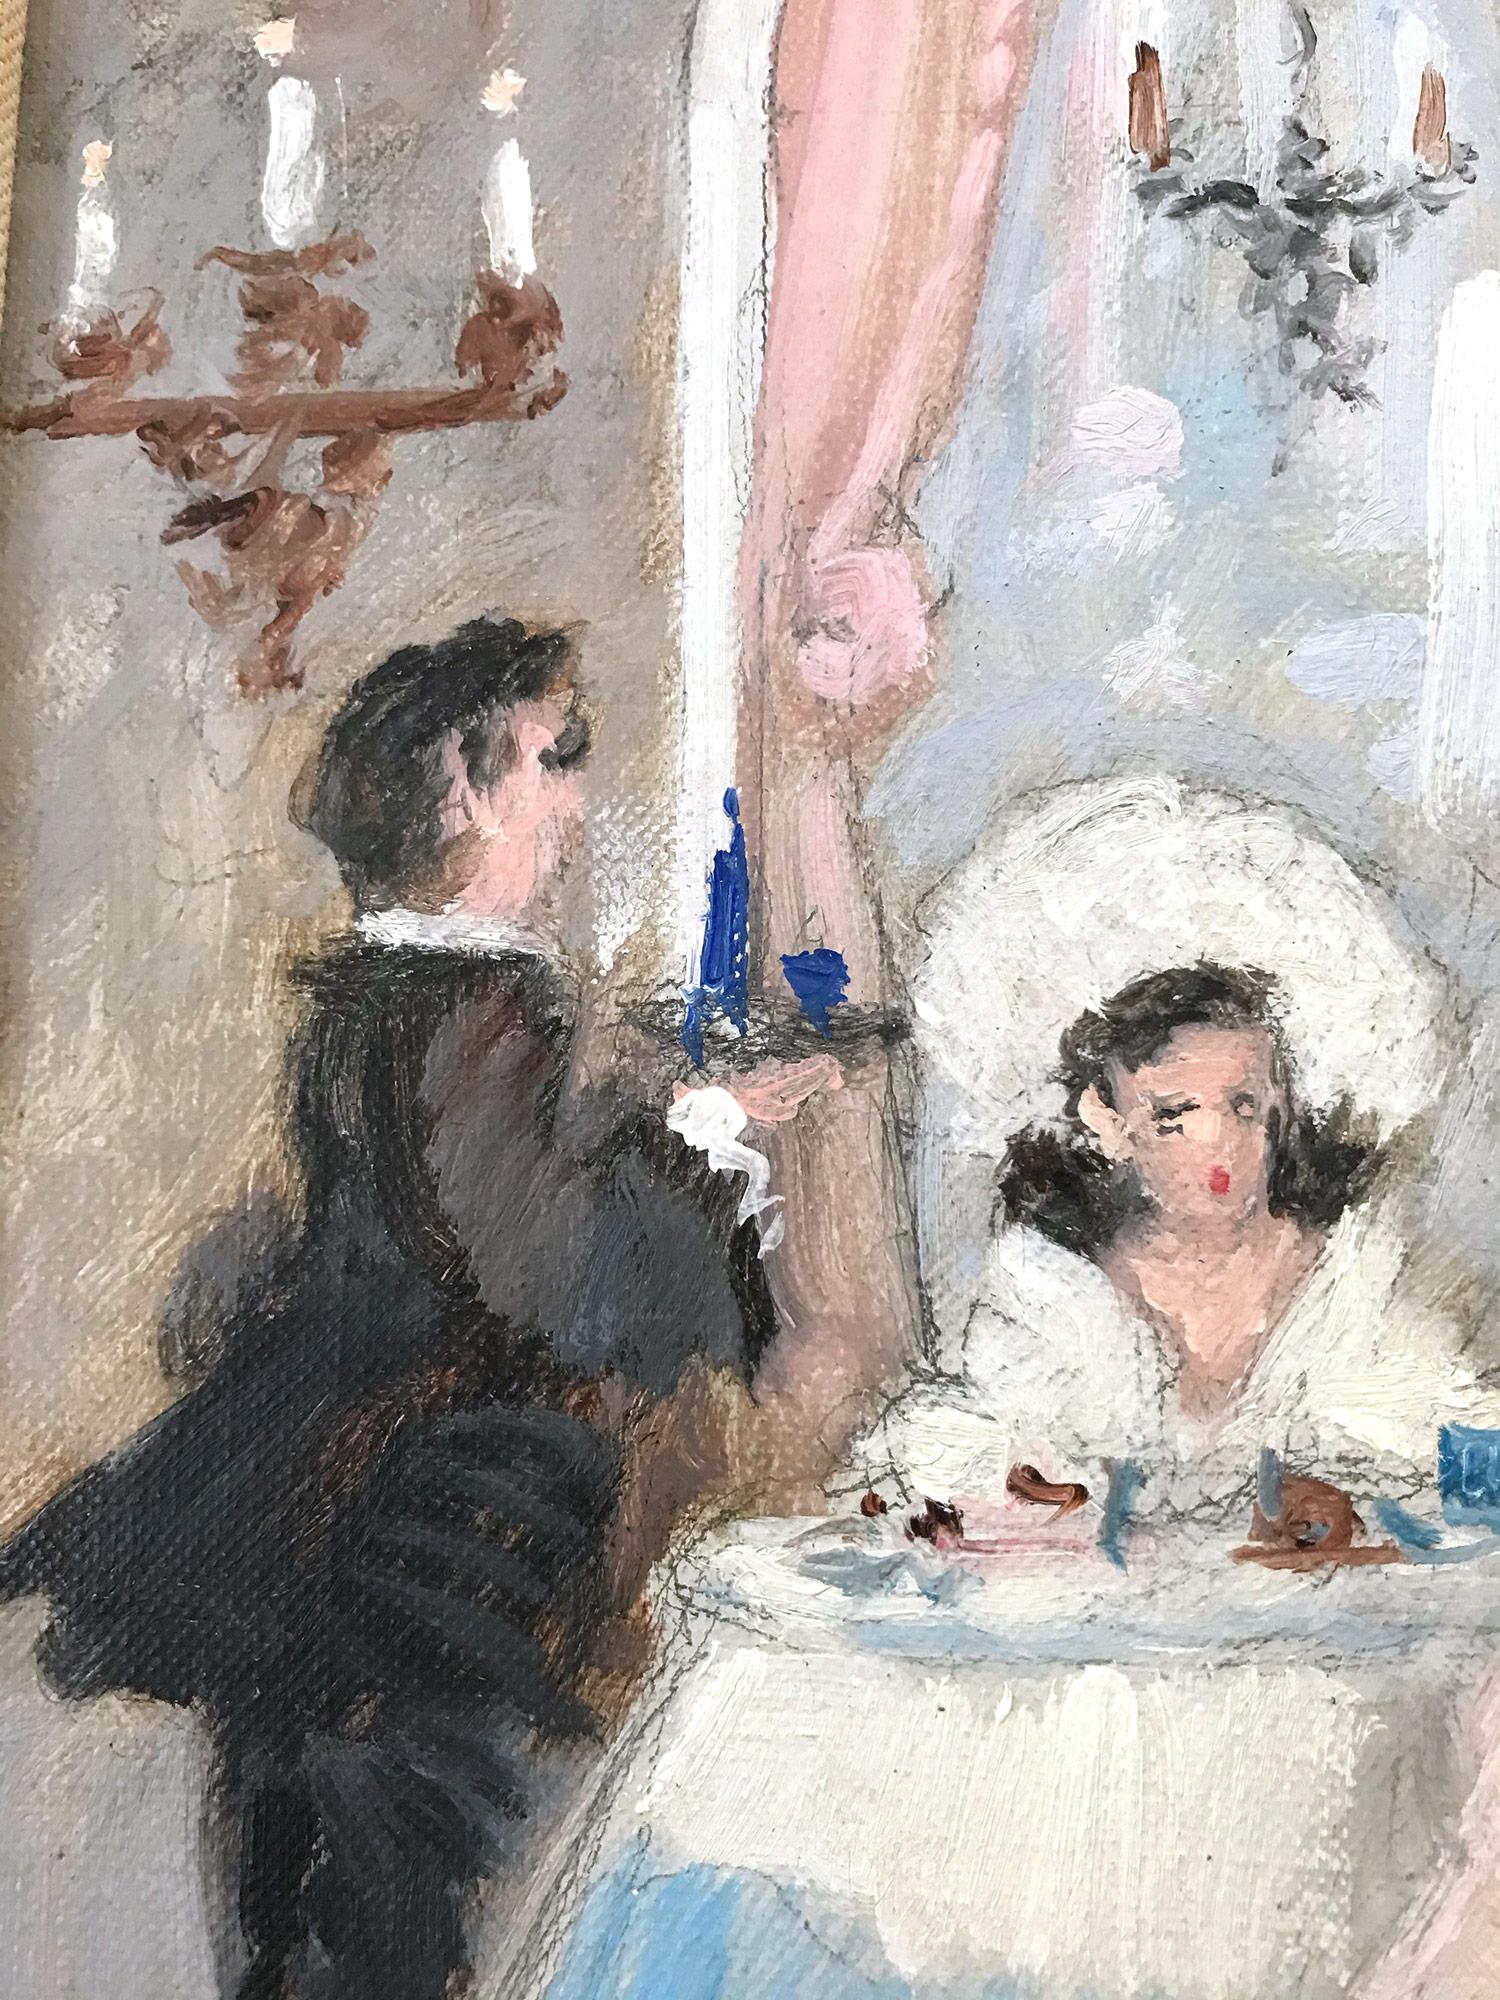 A whimsical oil painting depicting a Restaurant Scene in Paris with a waiter and customers. A truly intimate scene with candelabras shown left, and ornate settings throughout. As an Italian Impressionist artist, most of Cagliani's works were